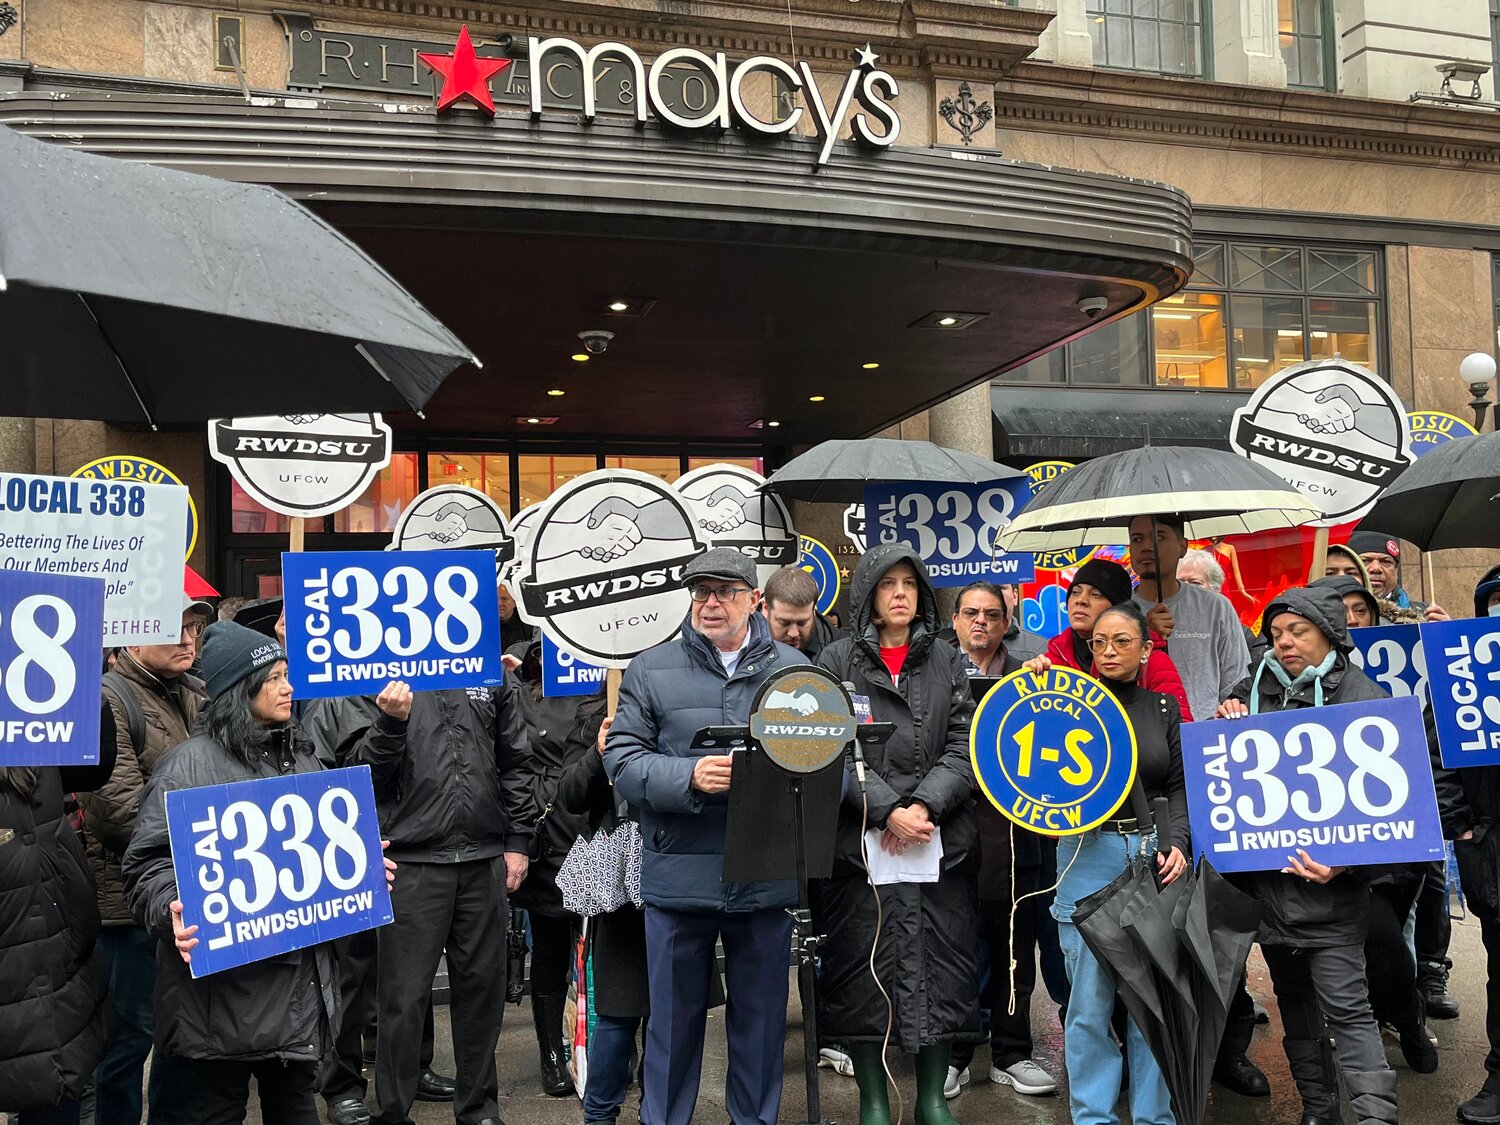 Stuart Appelbaum, center, the president of the 60,000-member Retail, Wholesale and Department Store Union, and other advocates spoke in favor of the recently introduced the Retail Worker Safety Act in front of Macy’s flagship location on 34th Street Thursday afternoon. The bill would require retail establishments with at least 10 employees to provide training and conduct risk assessments to protect retail workers.